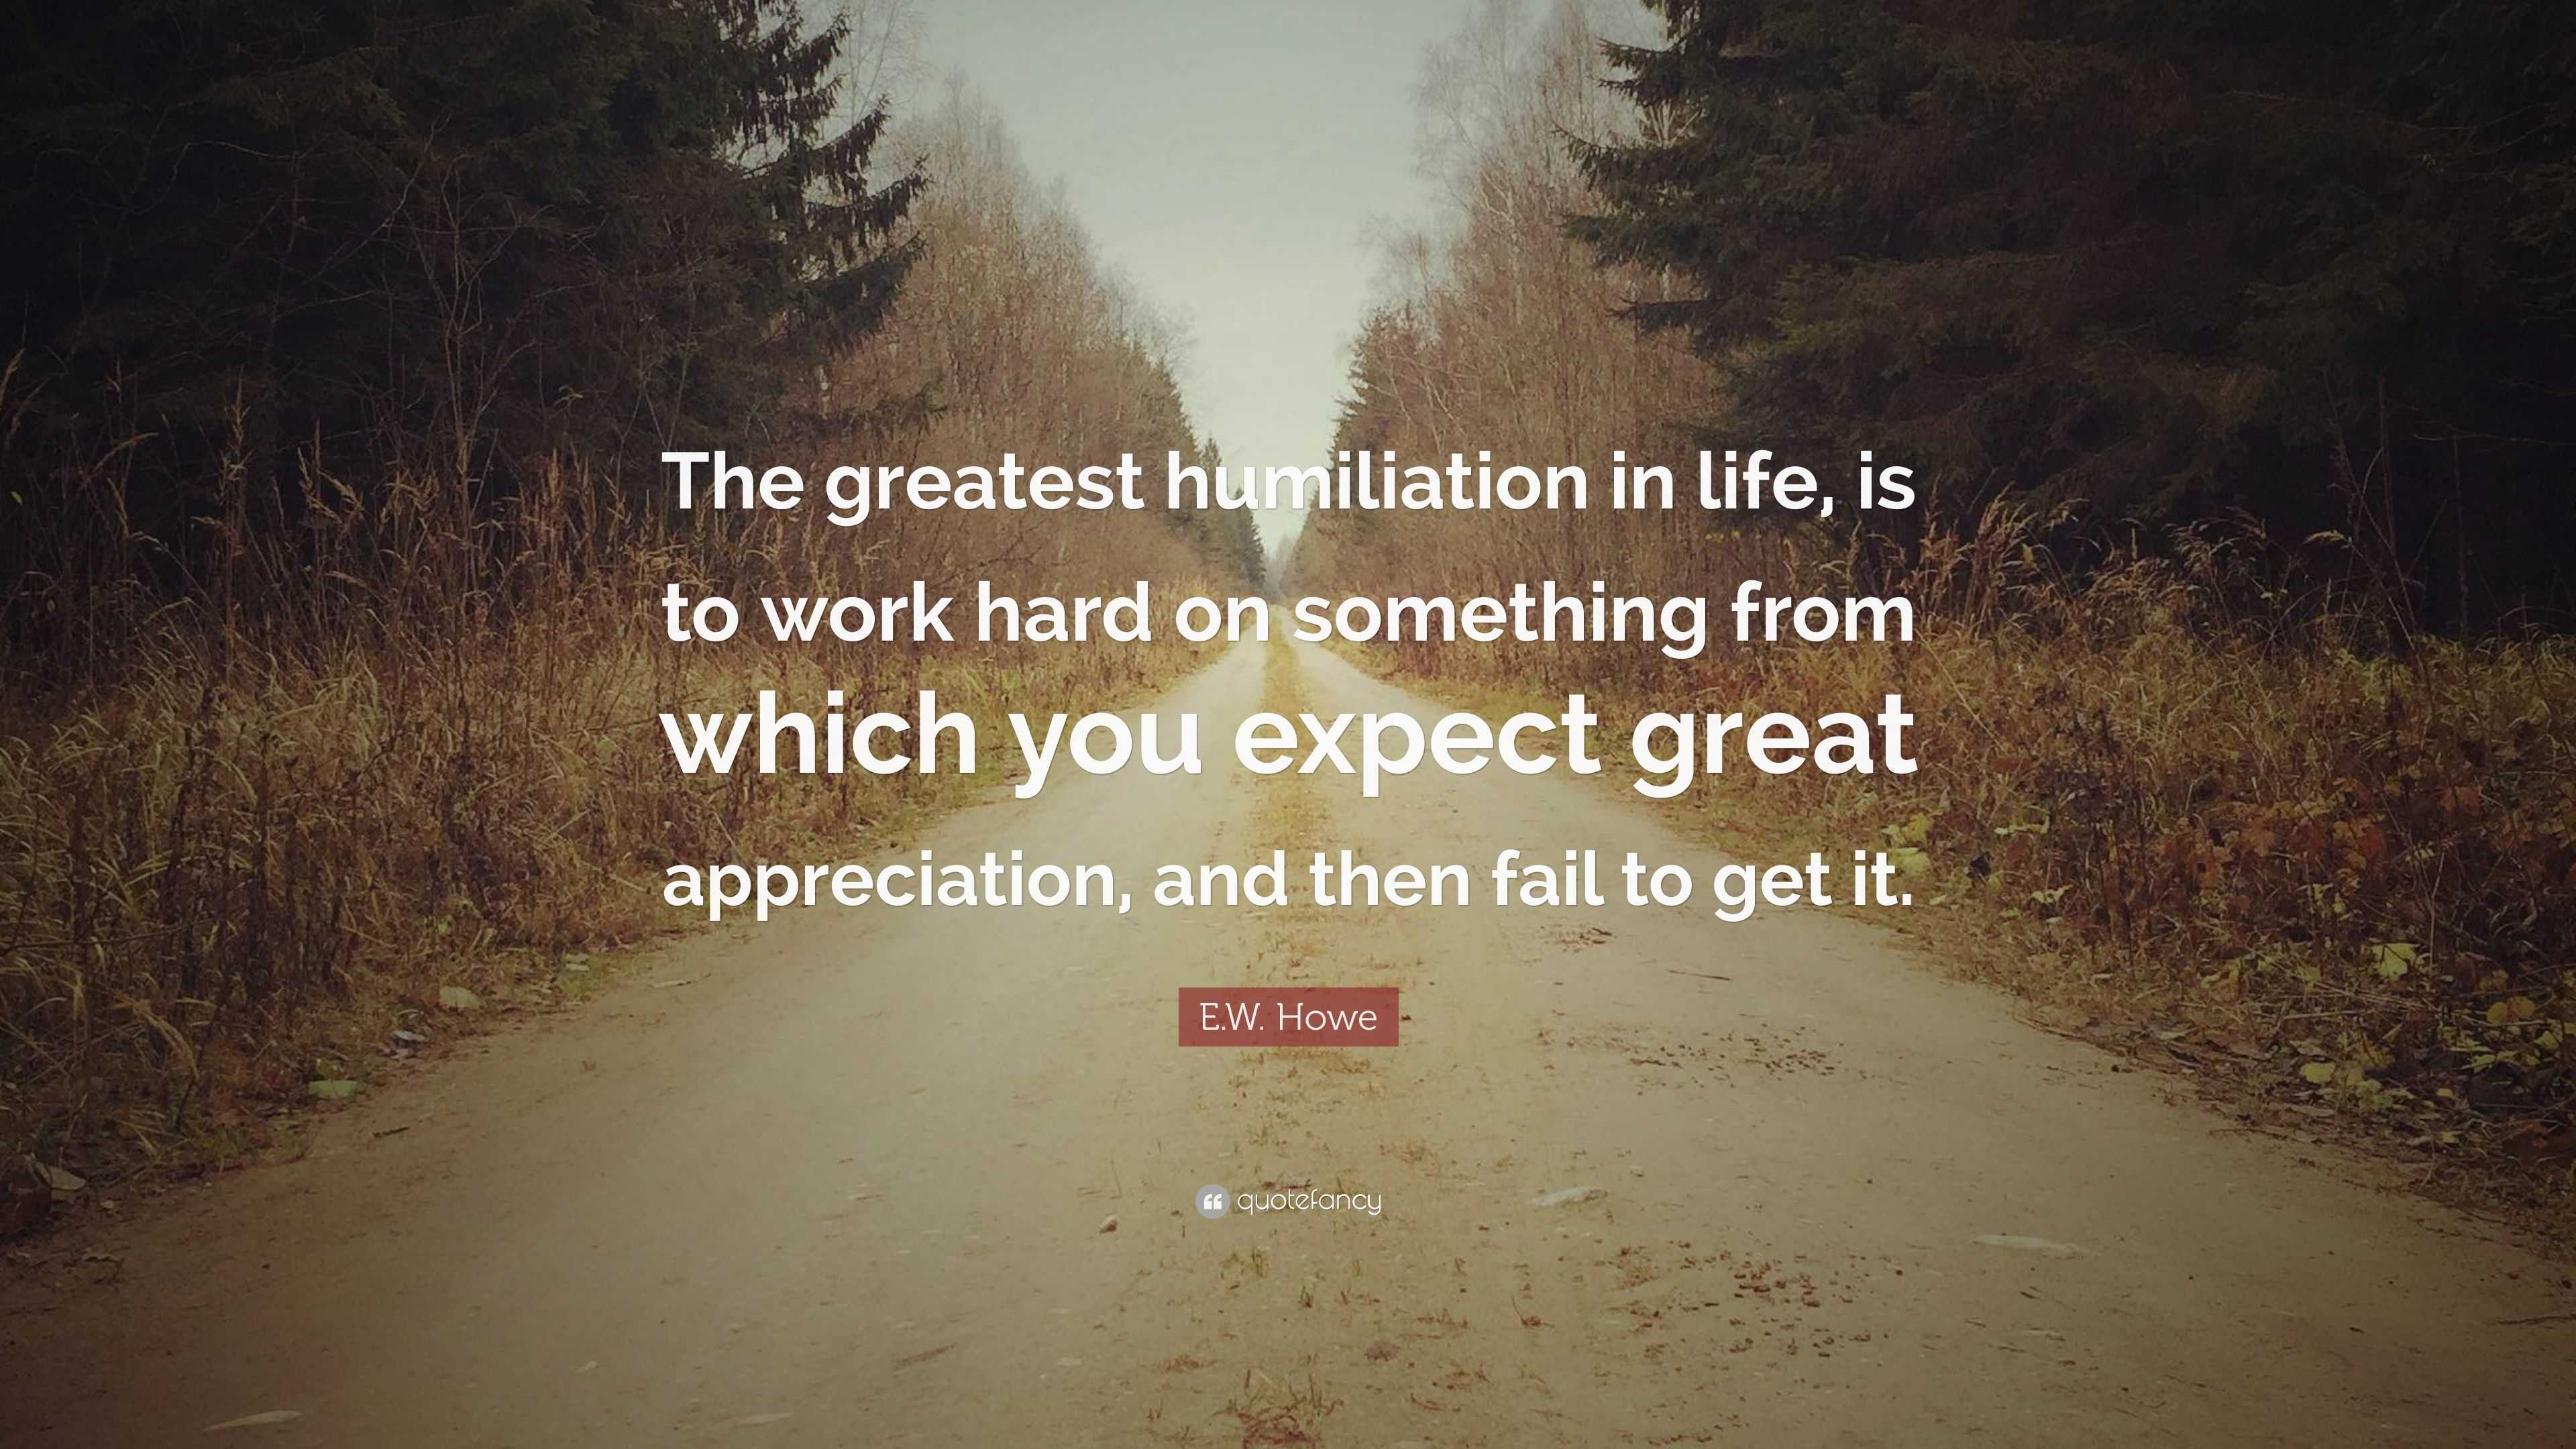 E.W. Howe Quote: “The greatest humiliation in life, is to work hard on ...